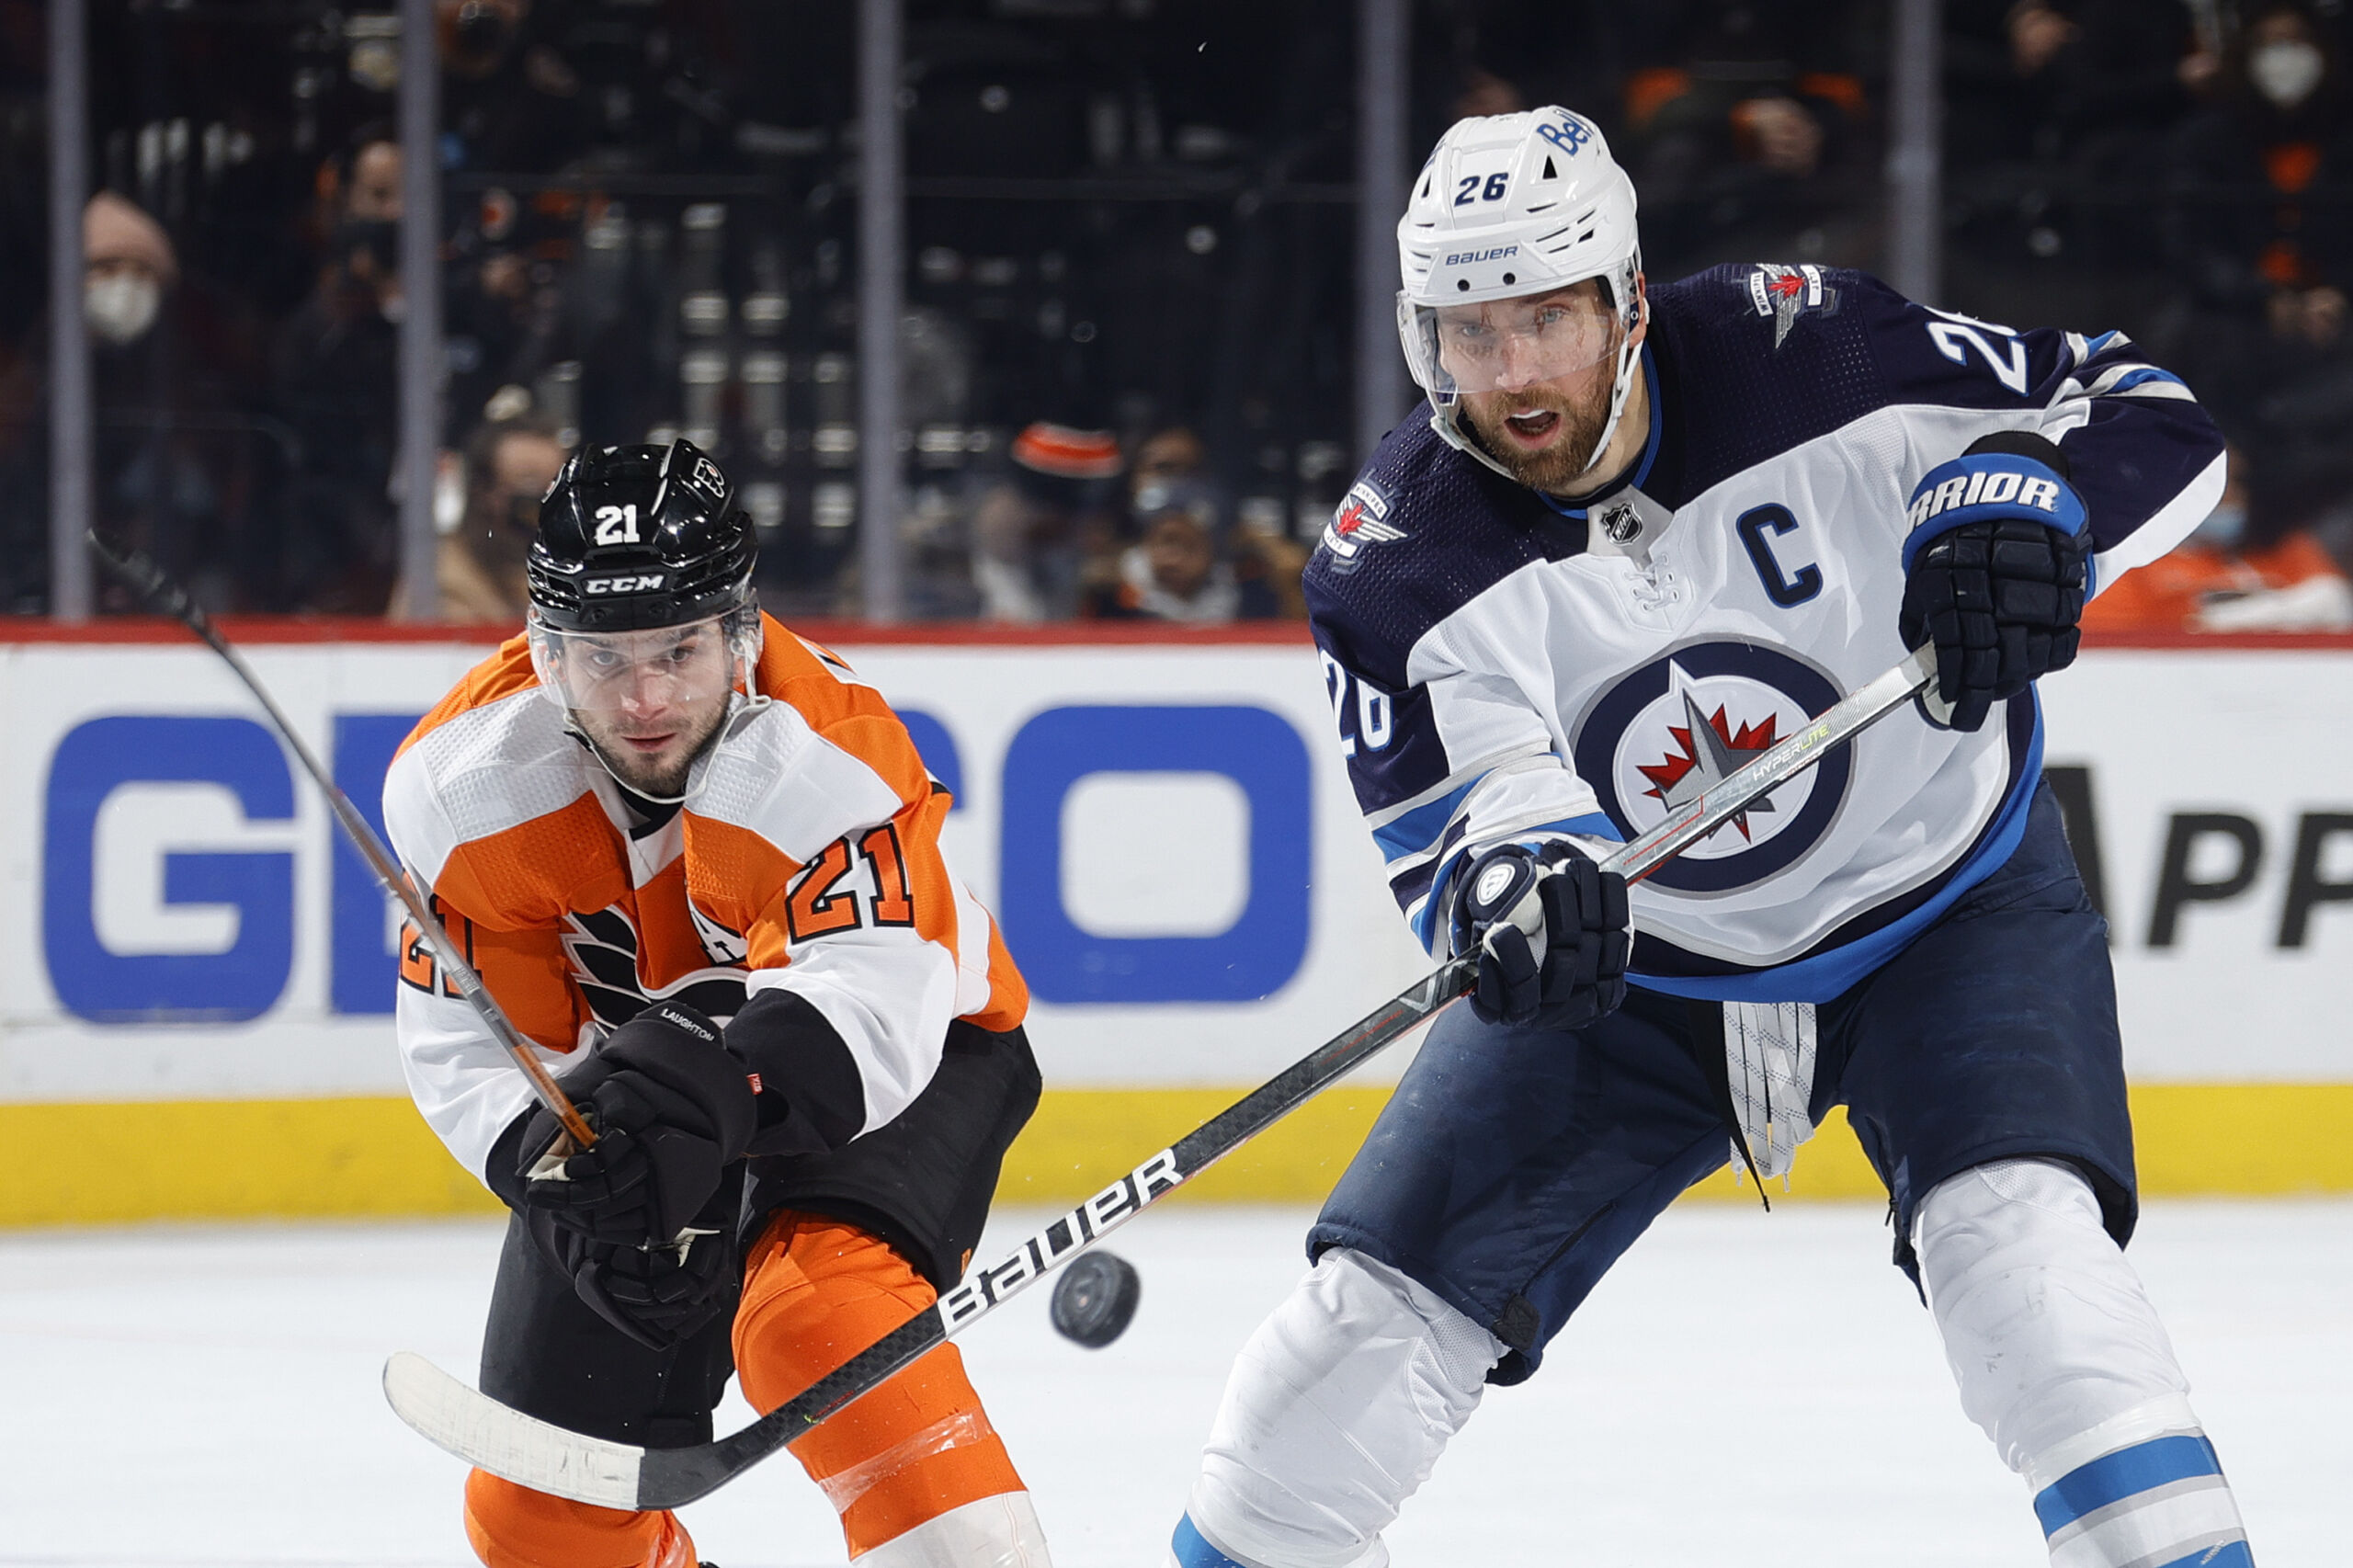 Jets captain Blake Wheeler out weeks with lower-body injury, coach says